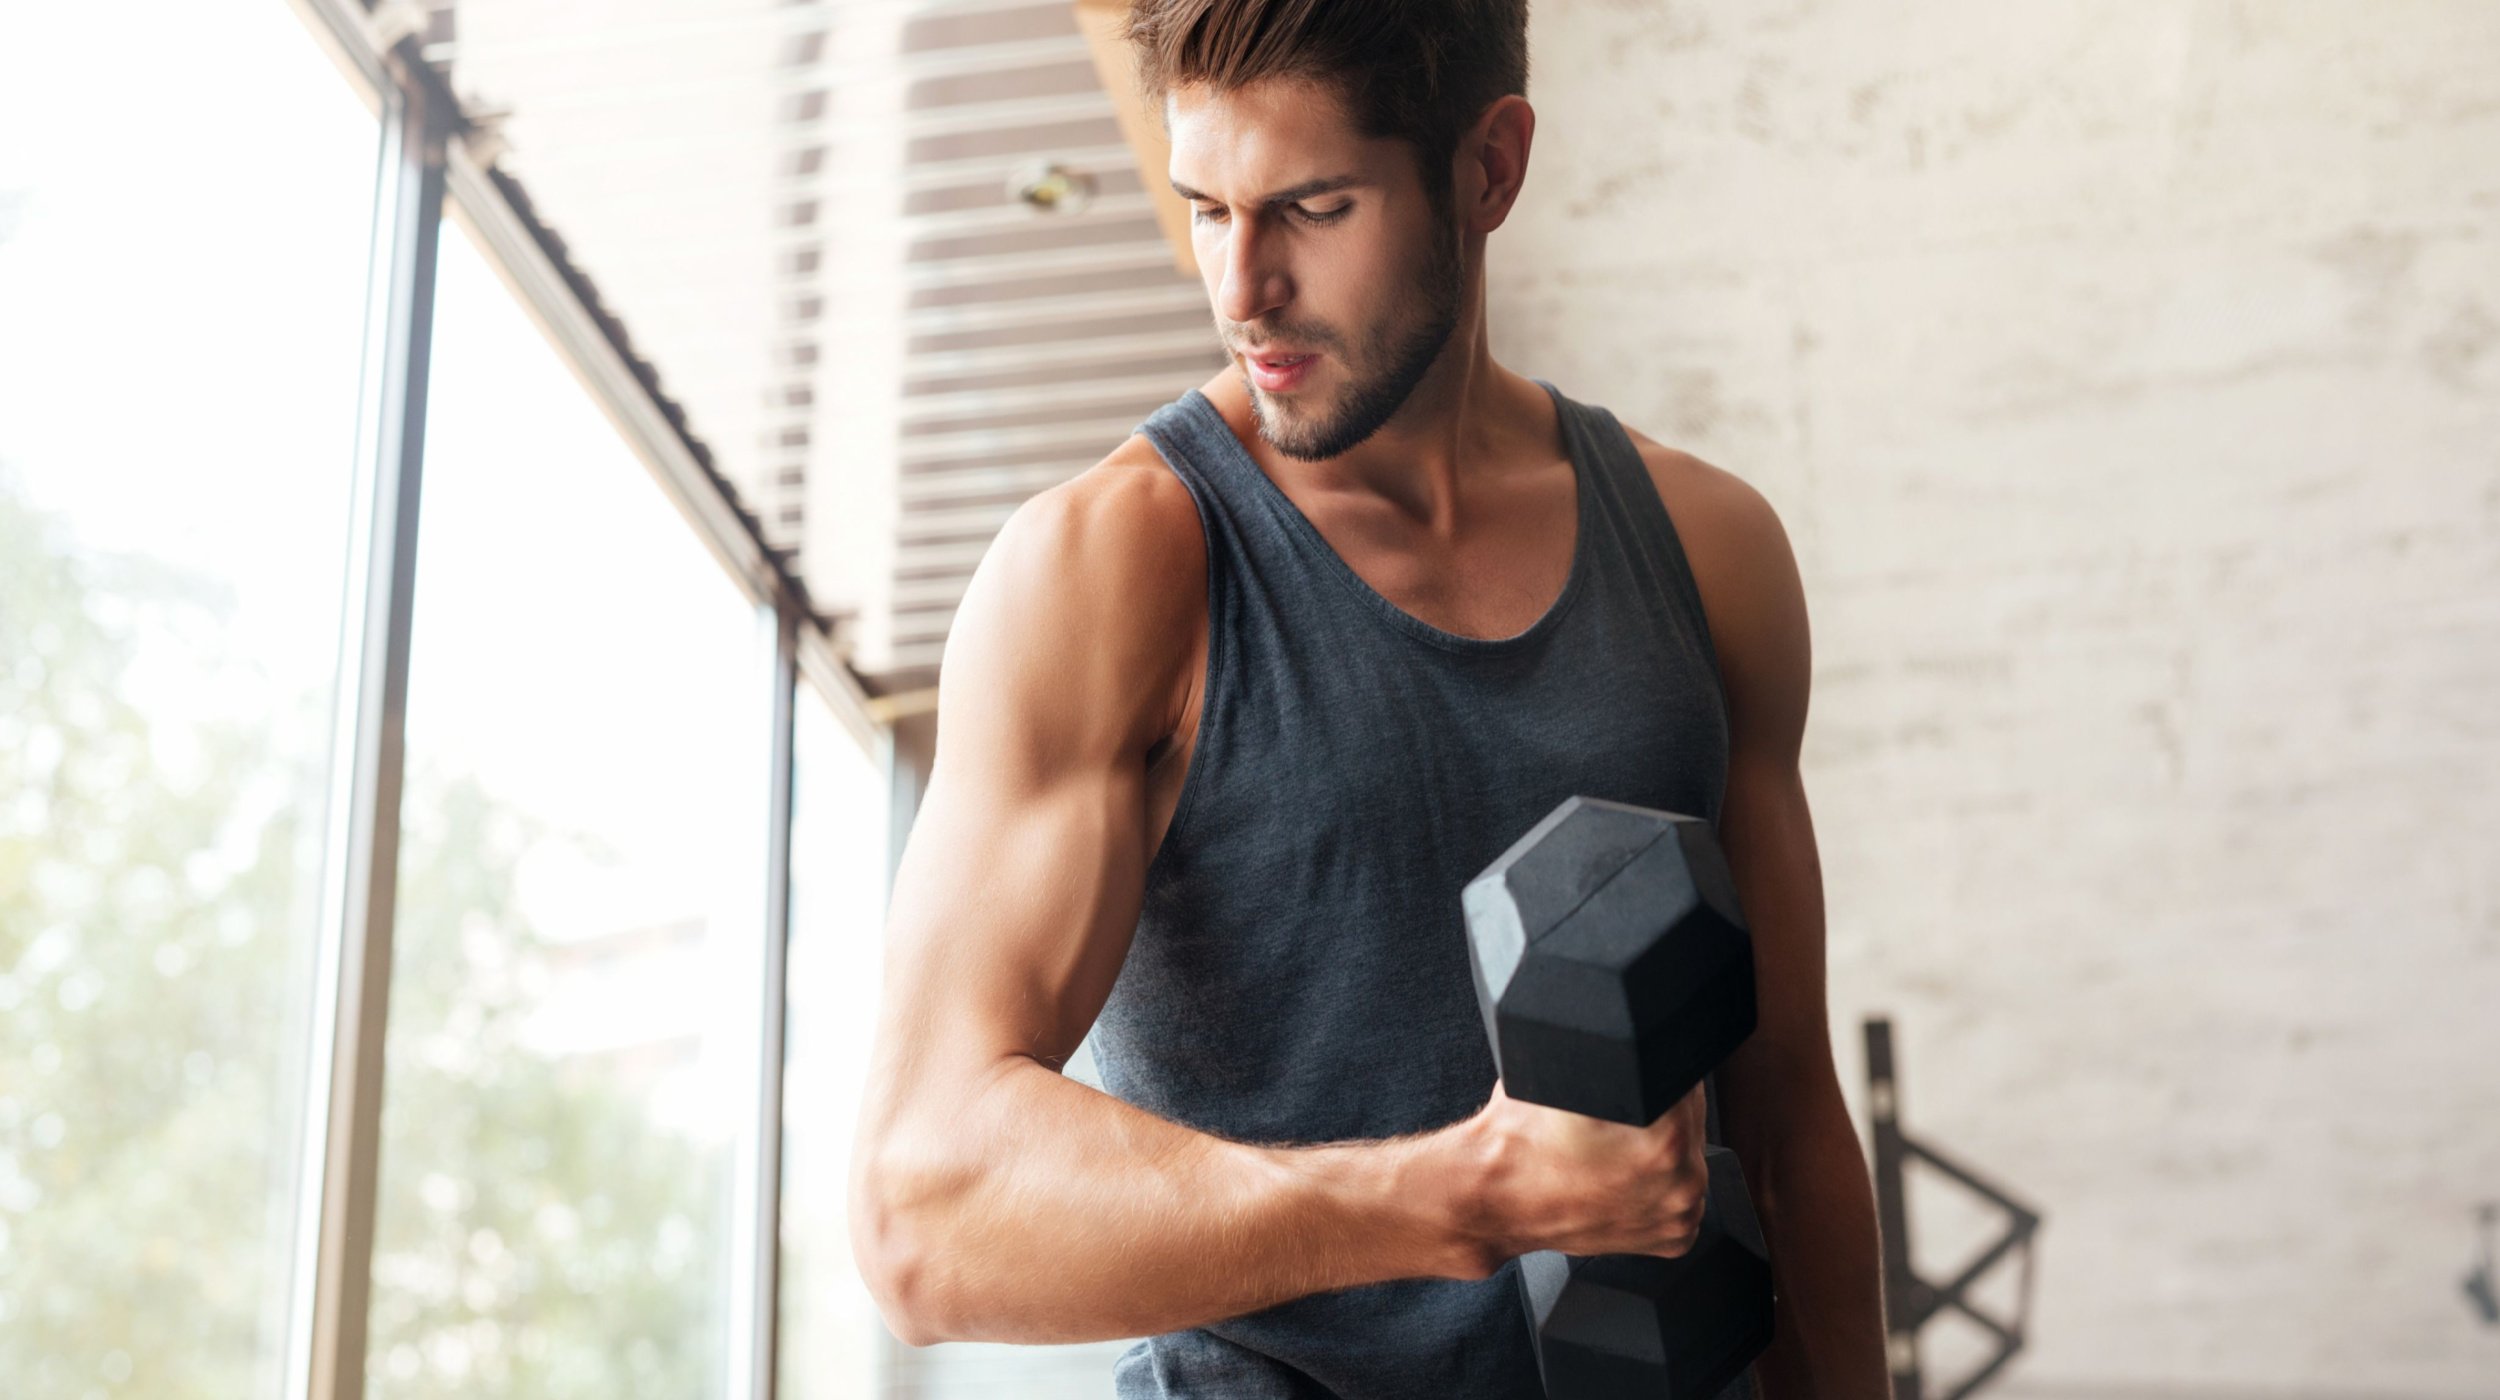 The Best Resistance Training Routine for a Beginner